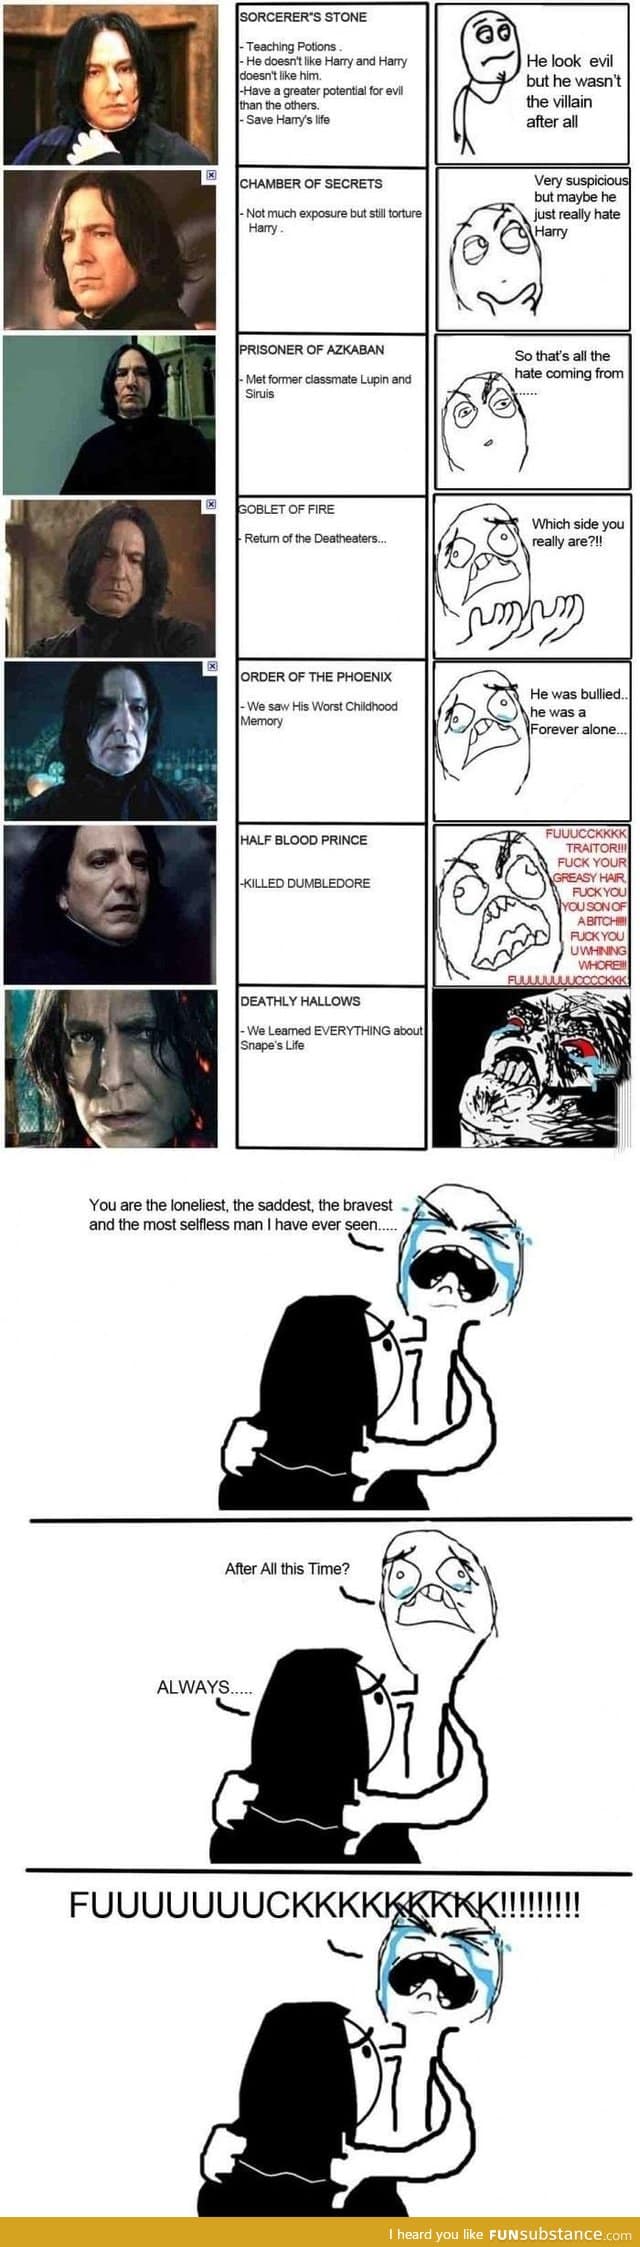 Snape throughout the series